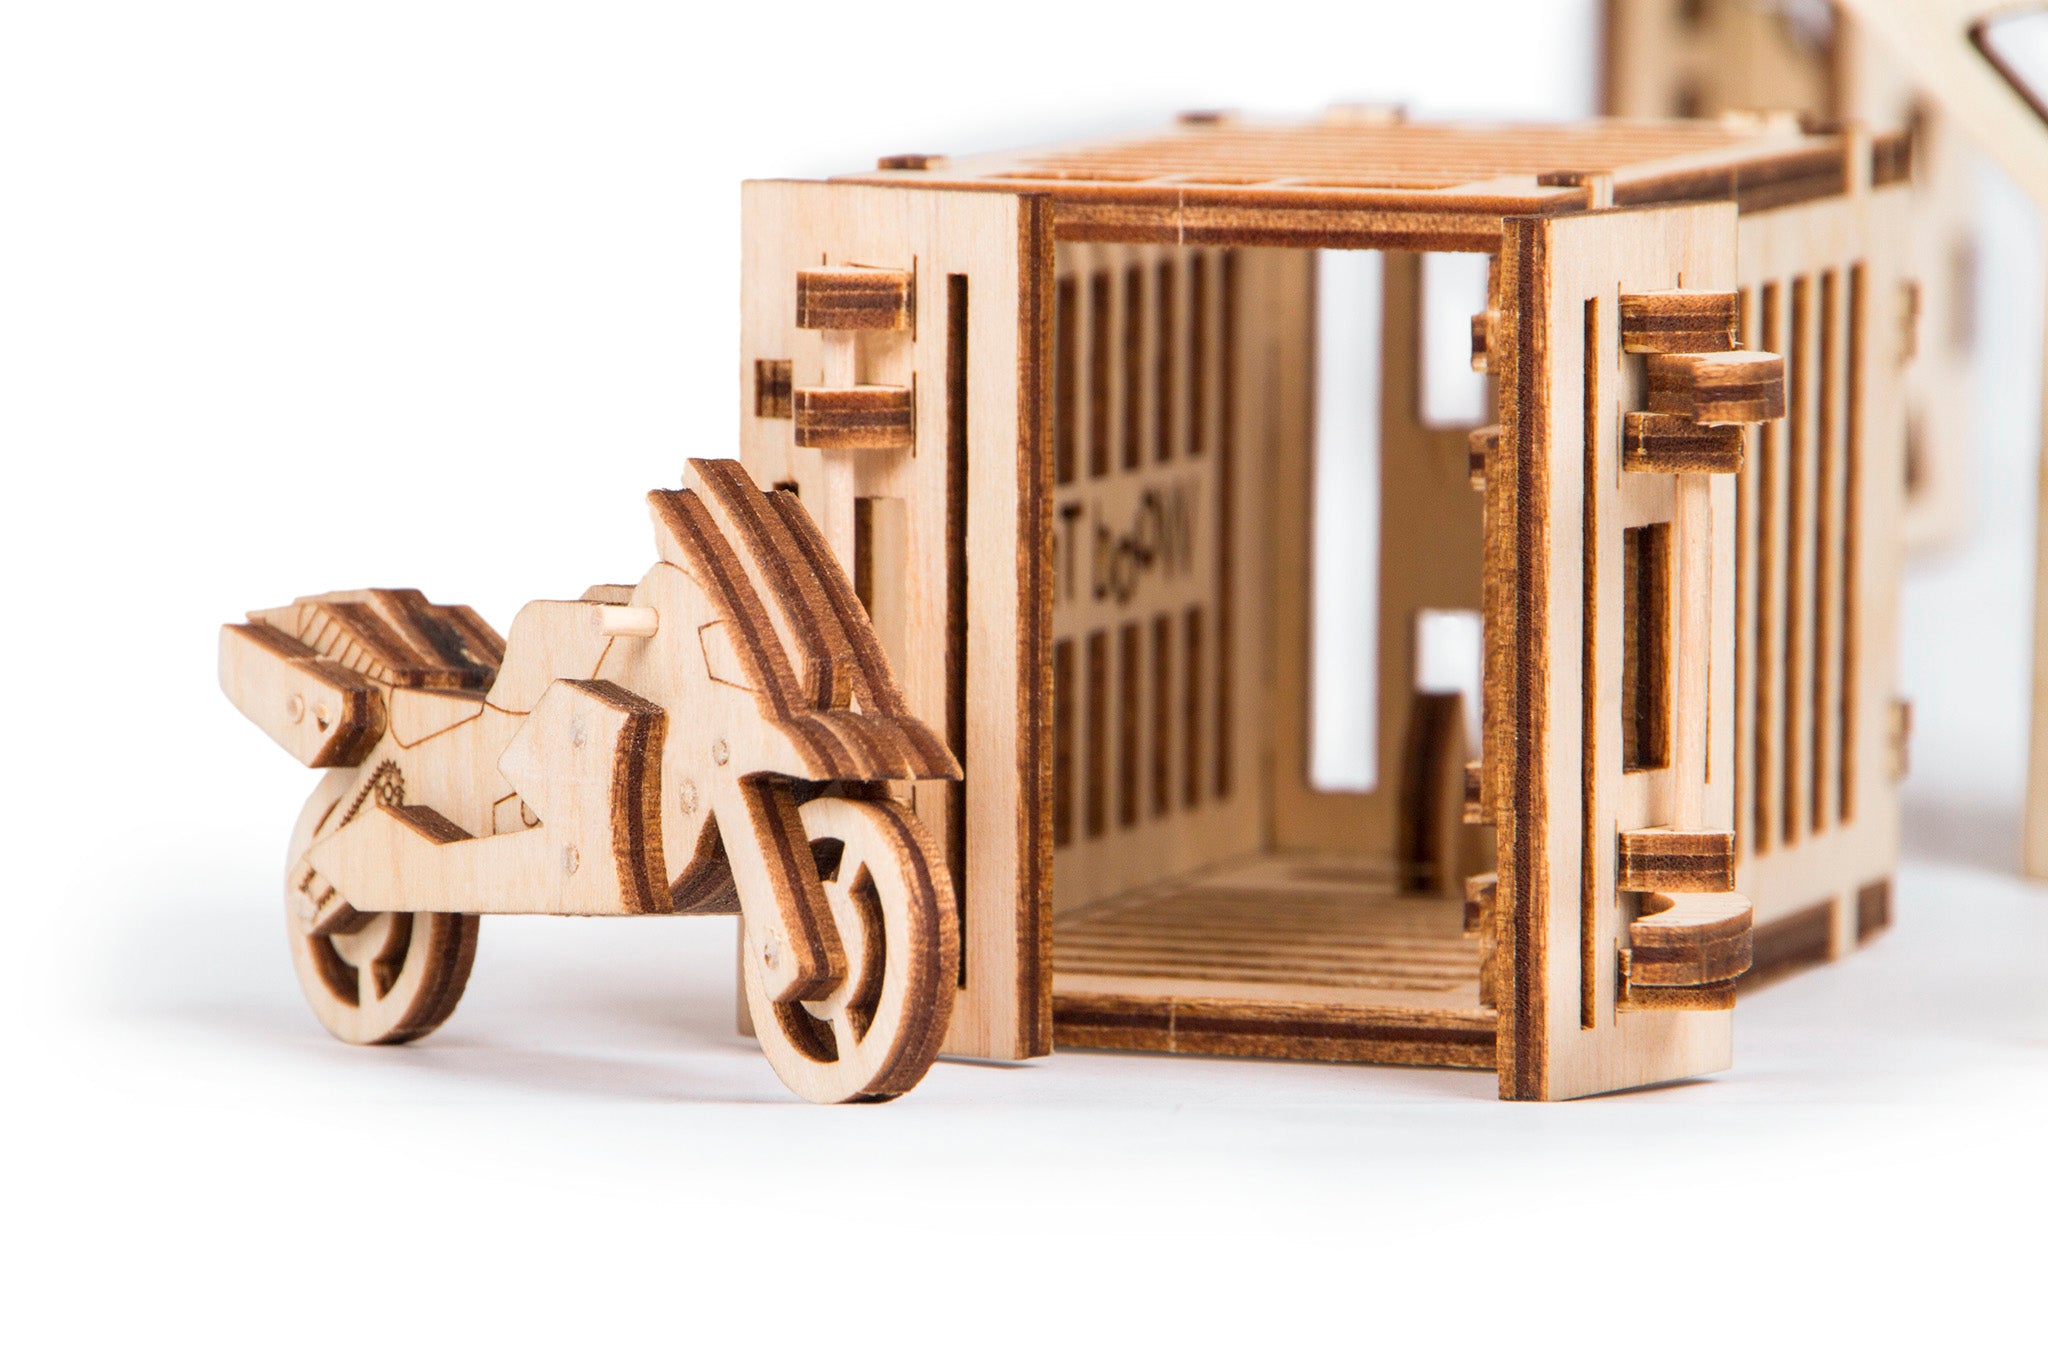 This cool 3d wooden mechanical model has a surprise in store.